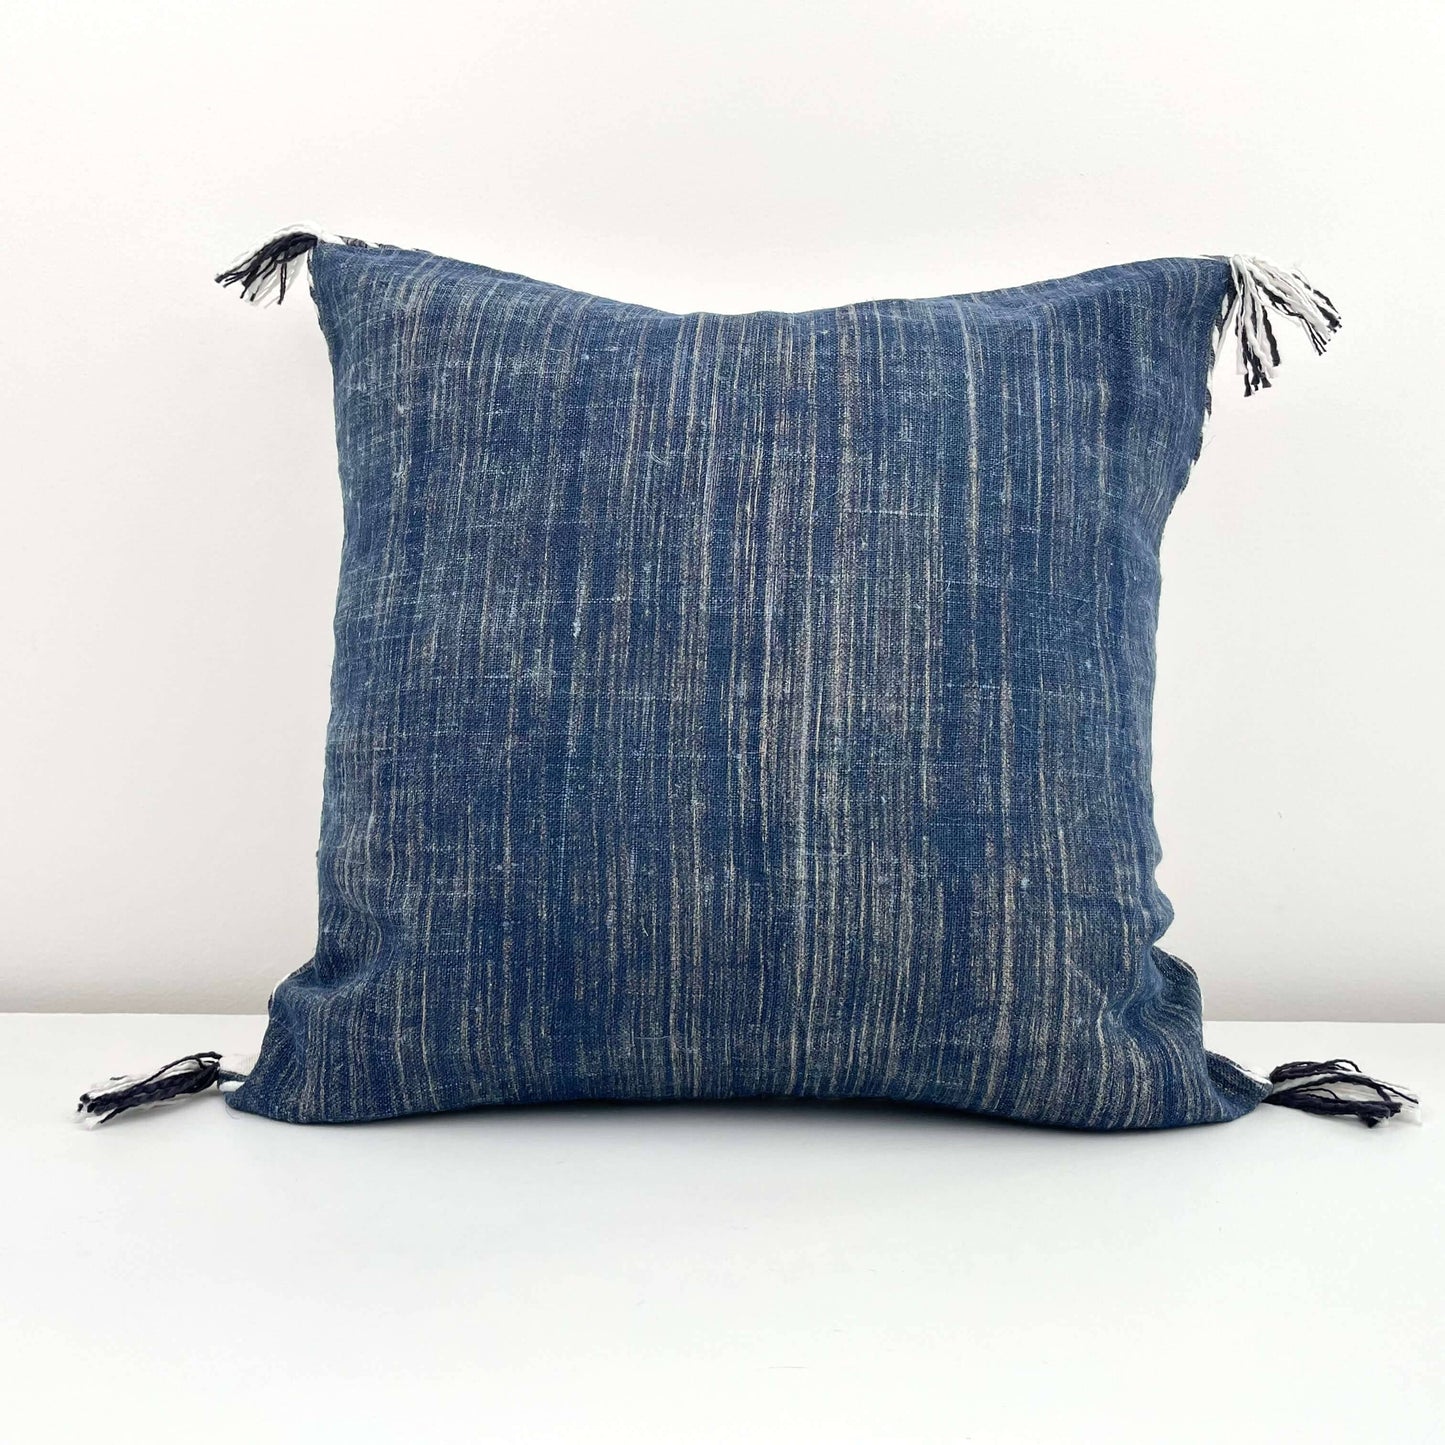 18x18 hand woven blue linen pillow cover with contrast edge